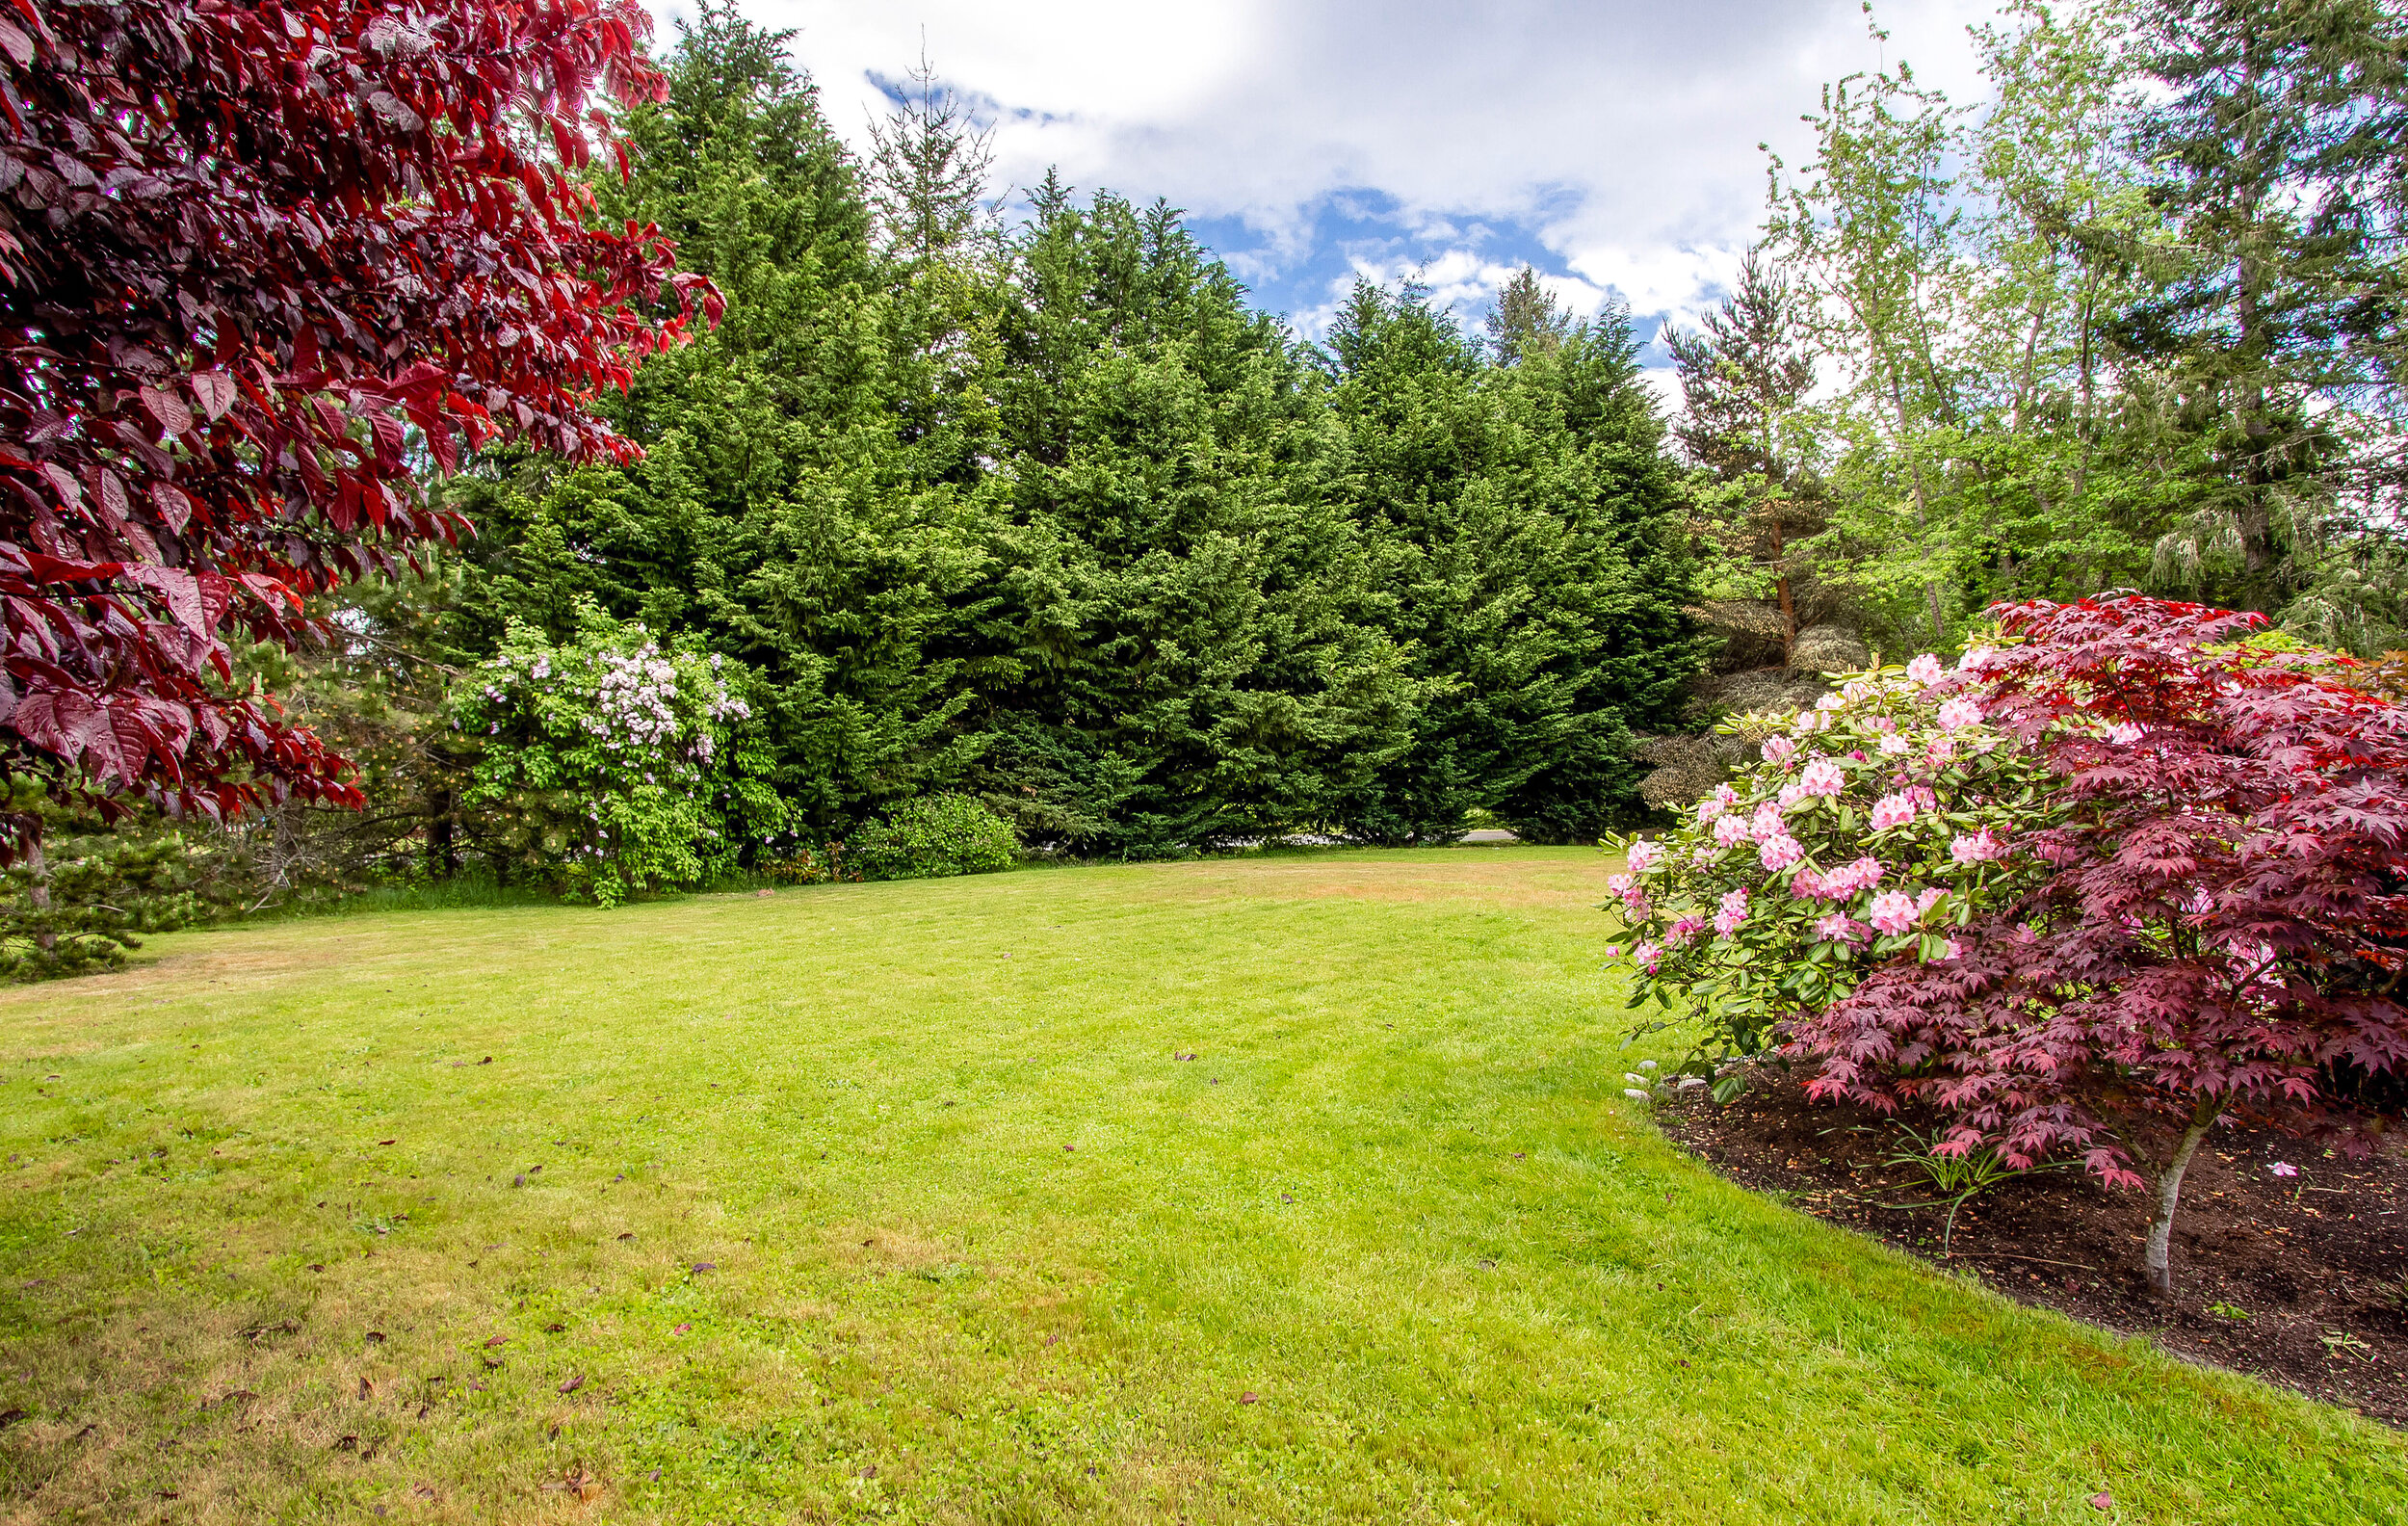  Enjoy spacious lawns and lush landscaping throughout the property.&nbsp; 